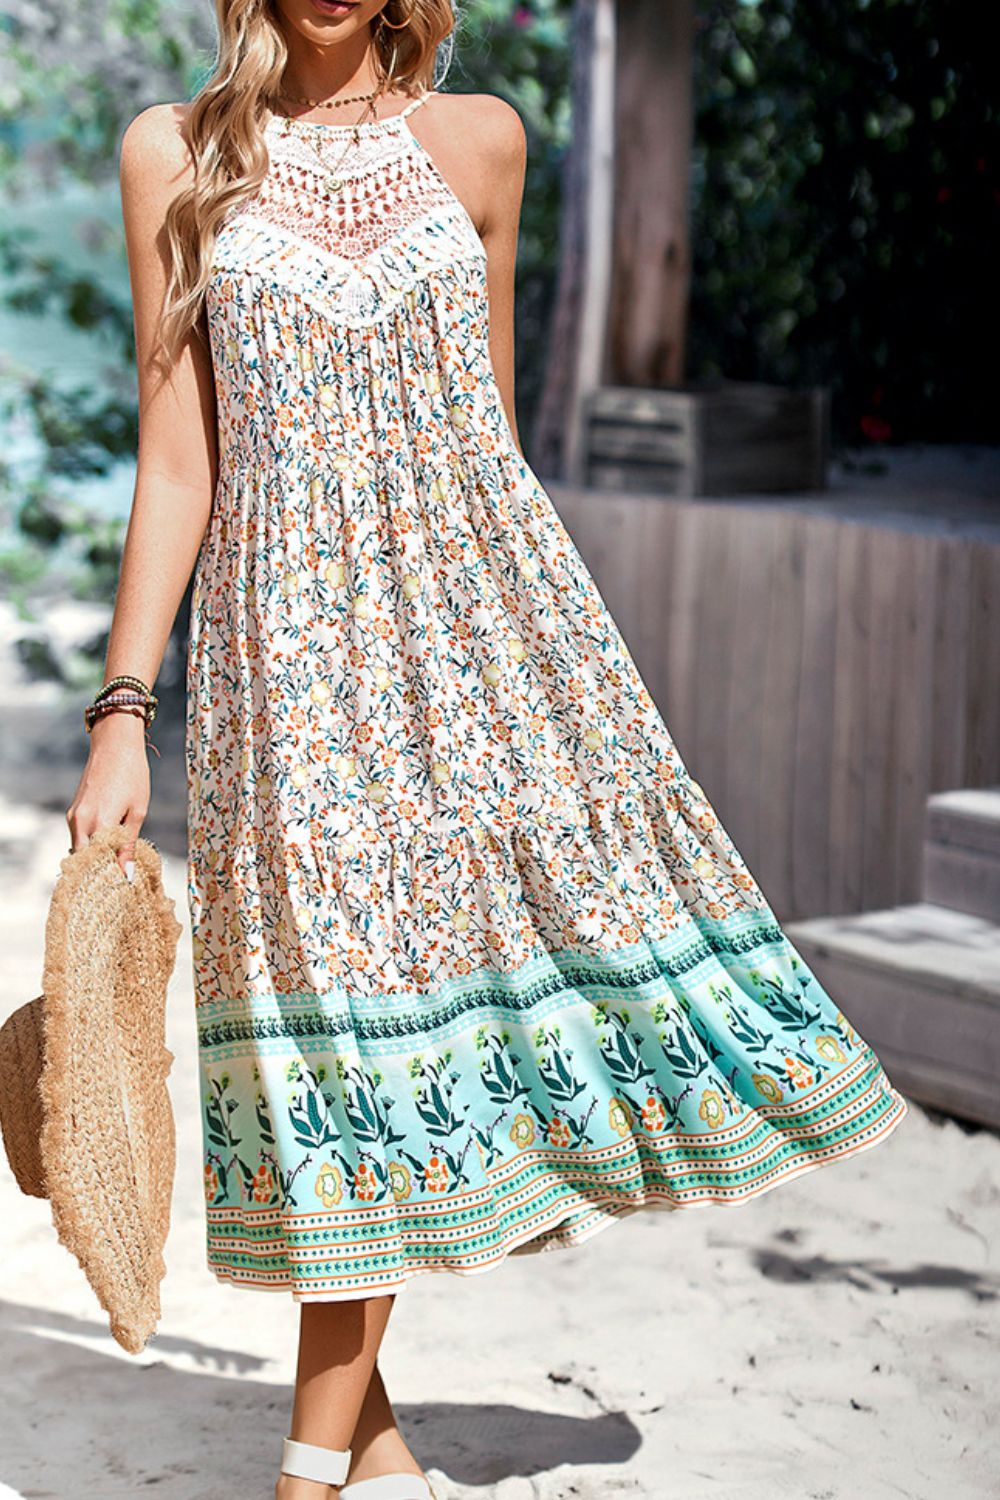 Gray Floral Print Bohemian Style Round Neck Sleeveless Dress Sentient Beauty Fashions Dresses